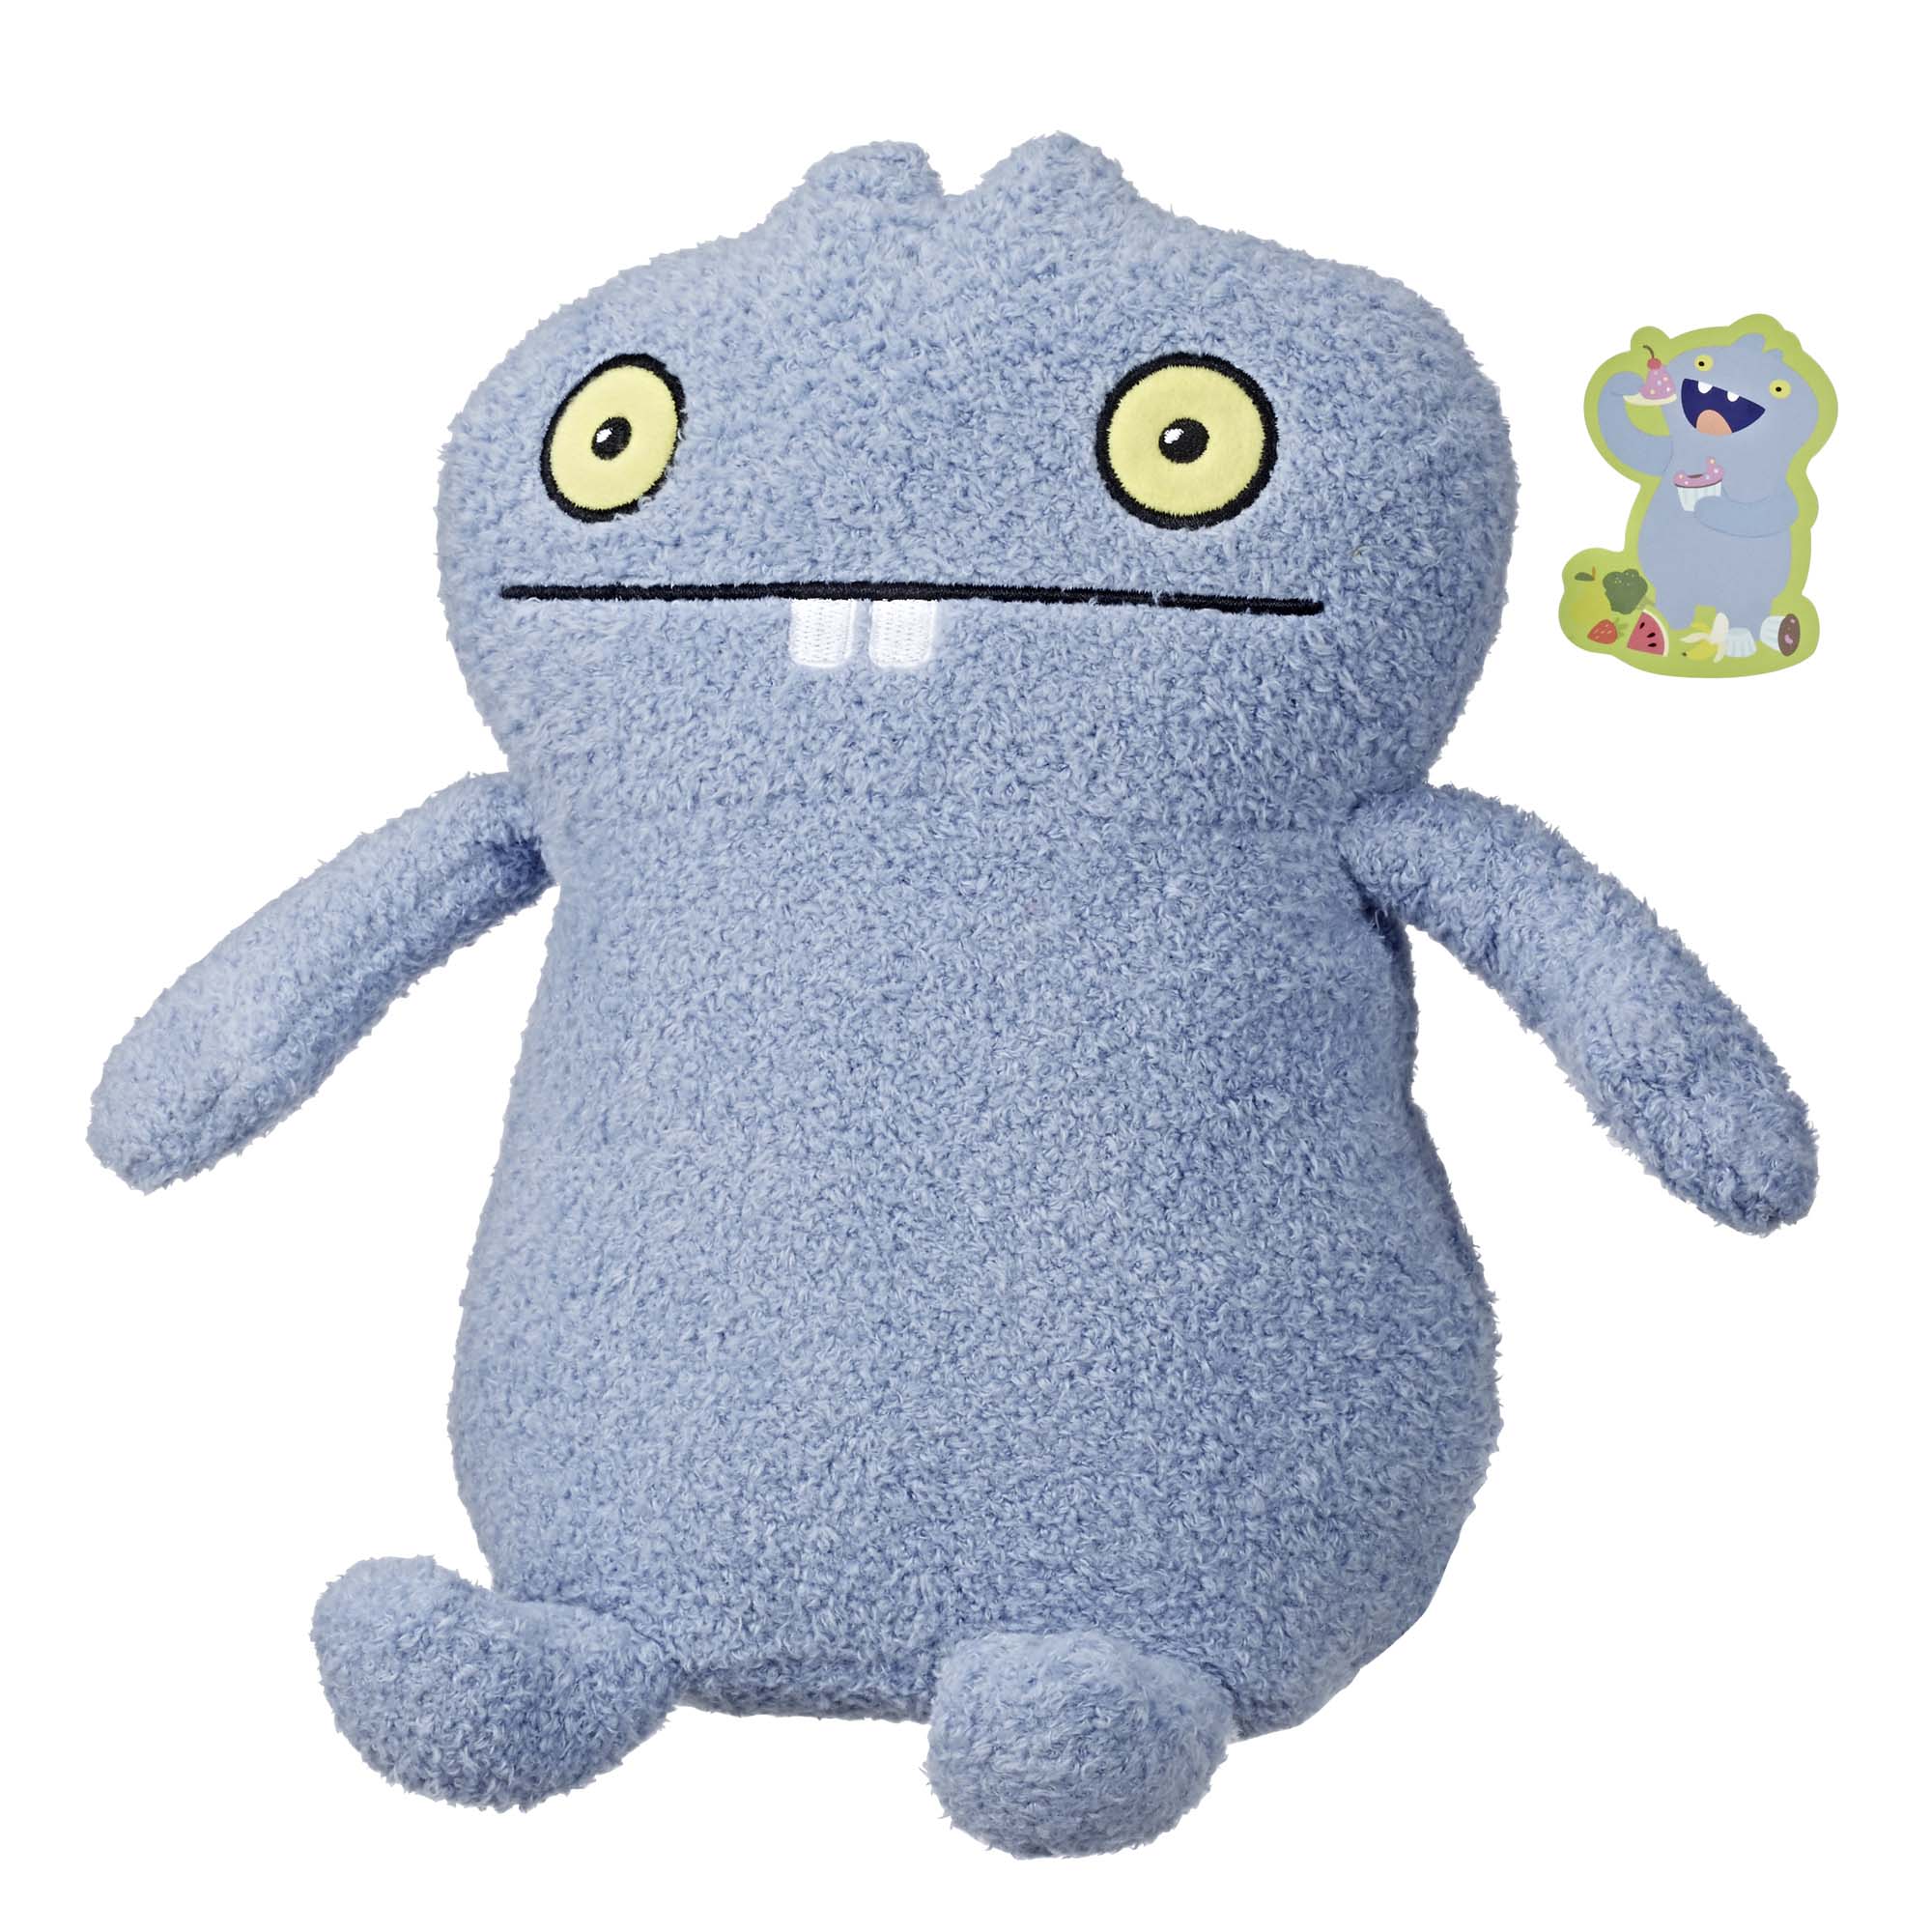 UglyDolls Hungrily Yours Babo Stuffed Plush Toy, 10.5 inches tall - image 1 of 8